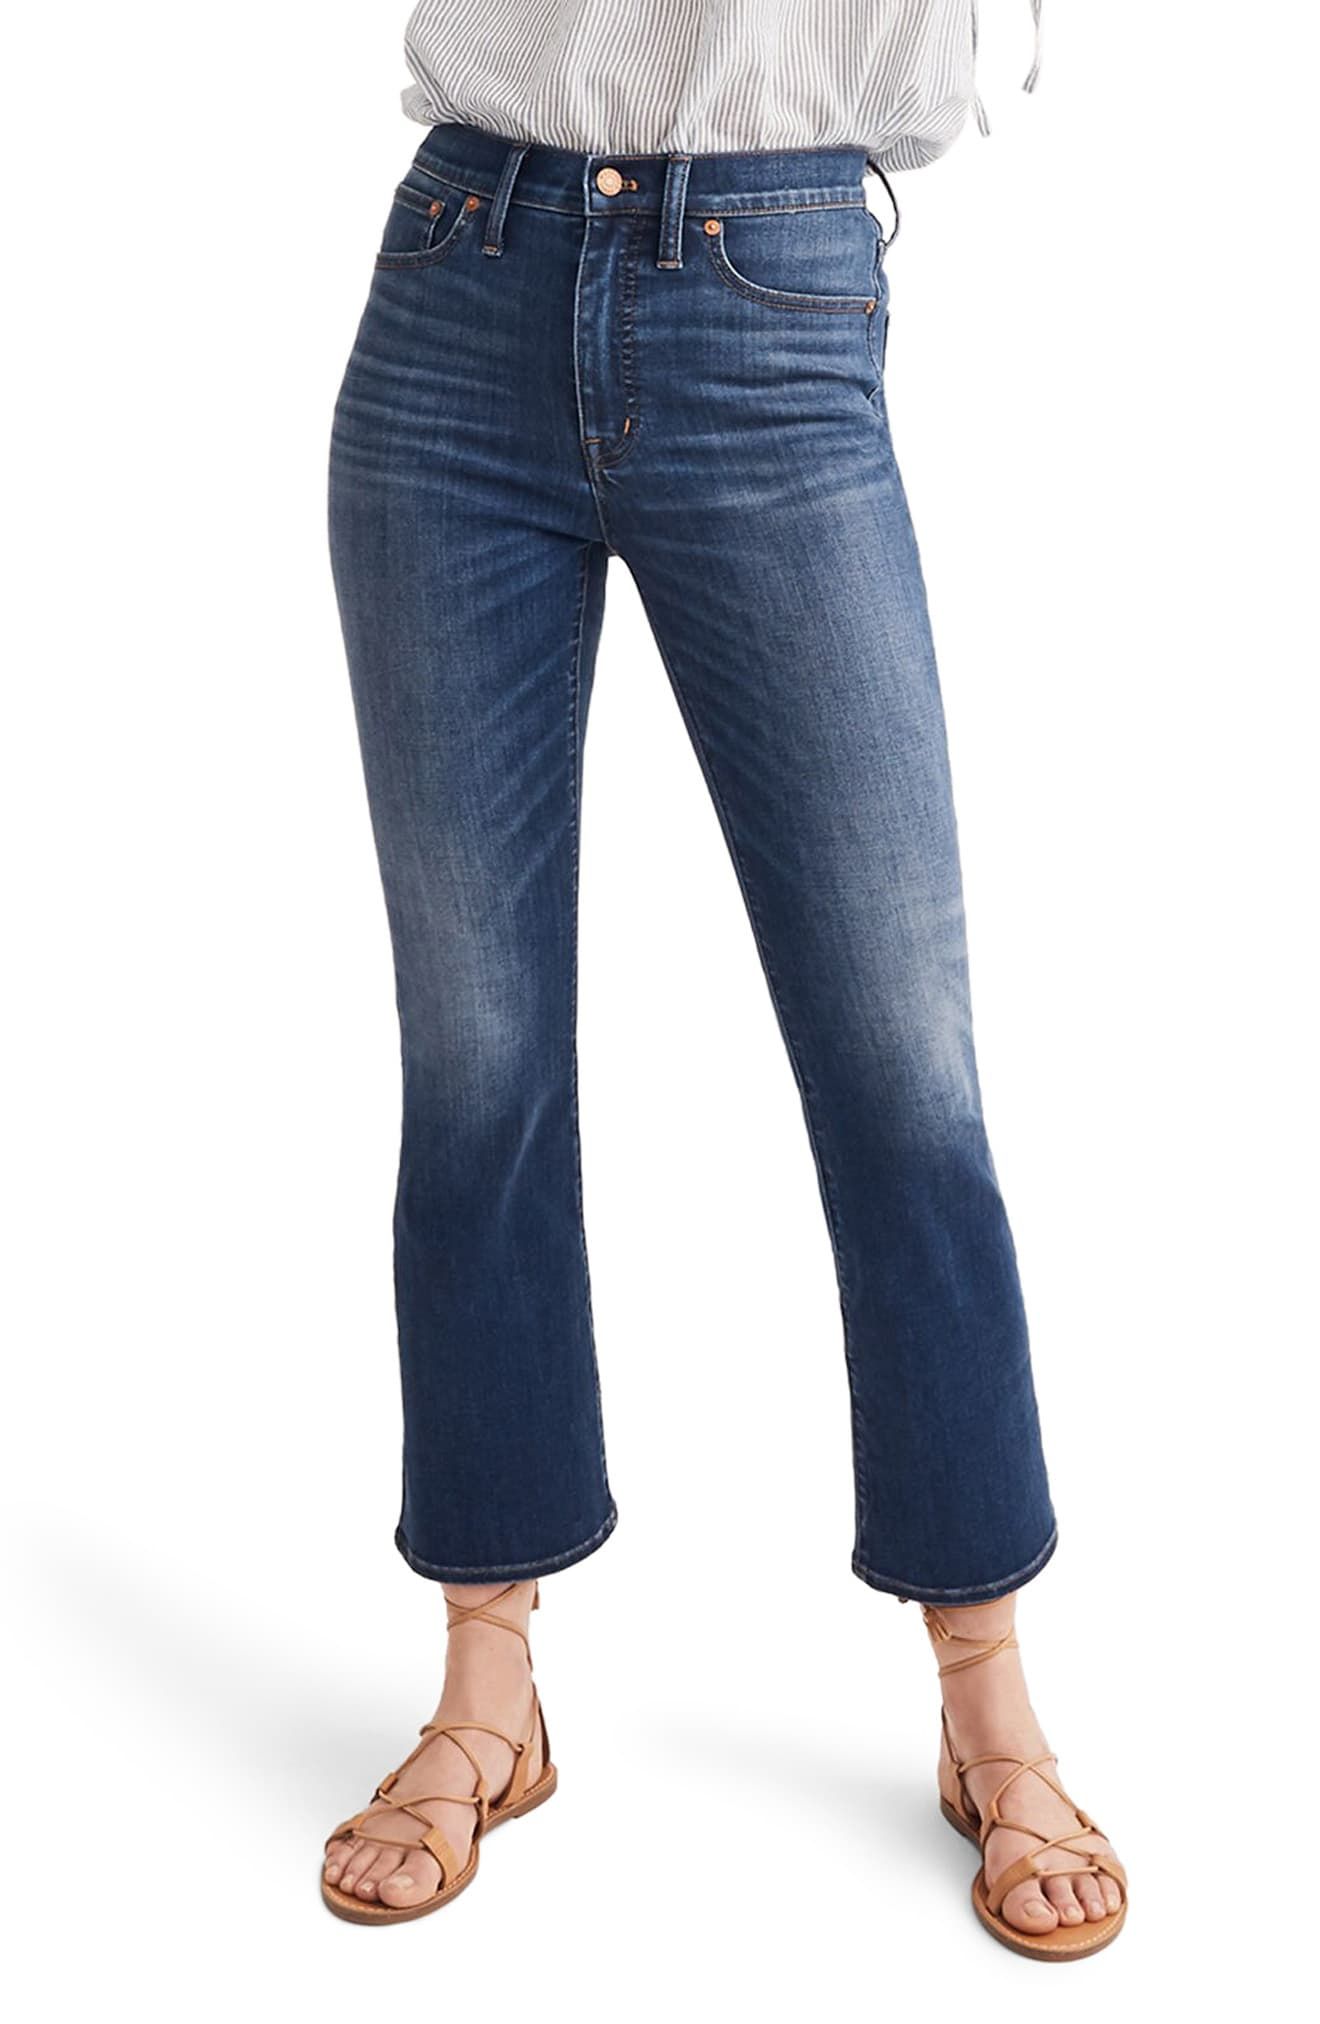 extreme high waisted jeans